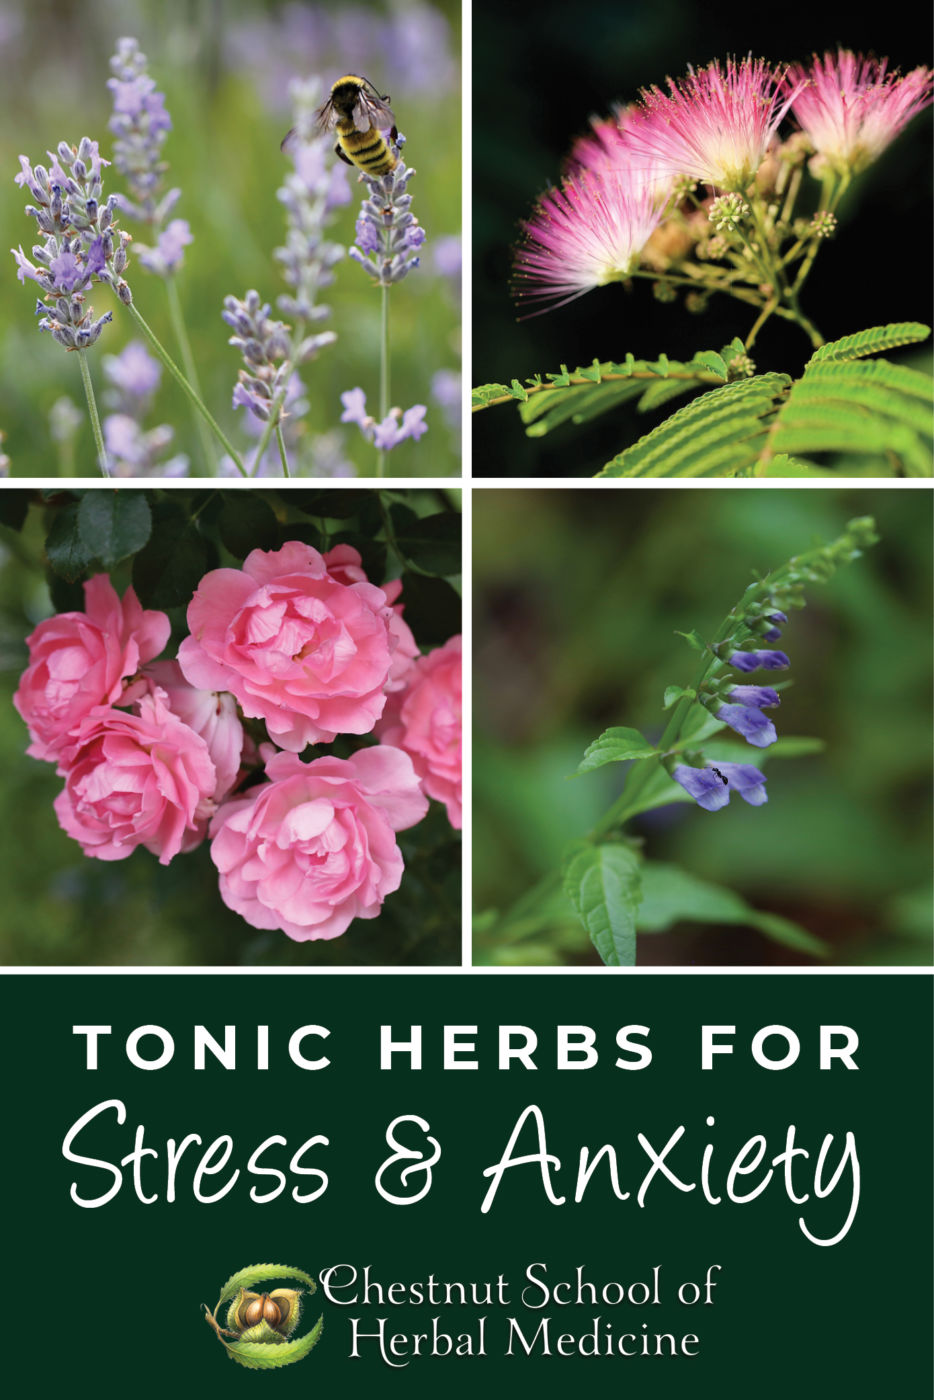 Tonic Herbs for Stress and Anxiety